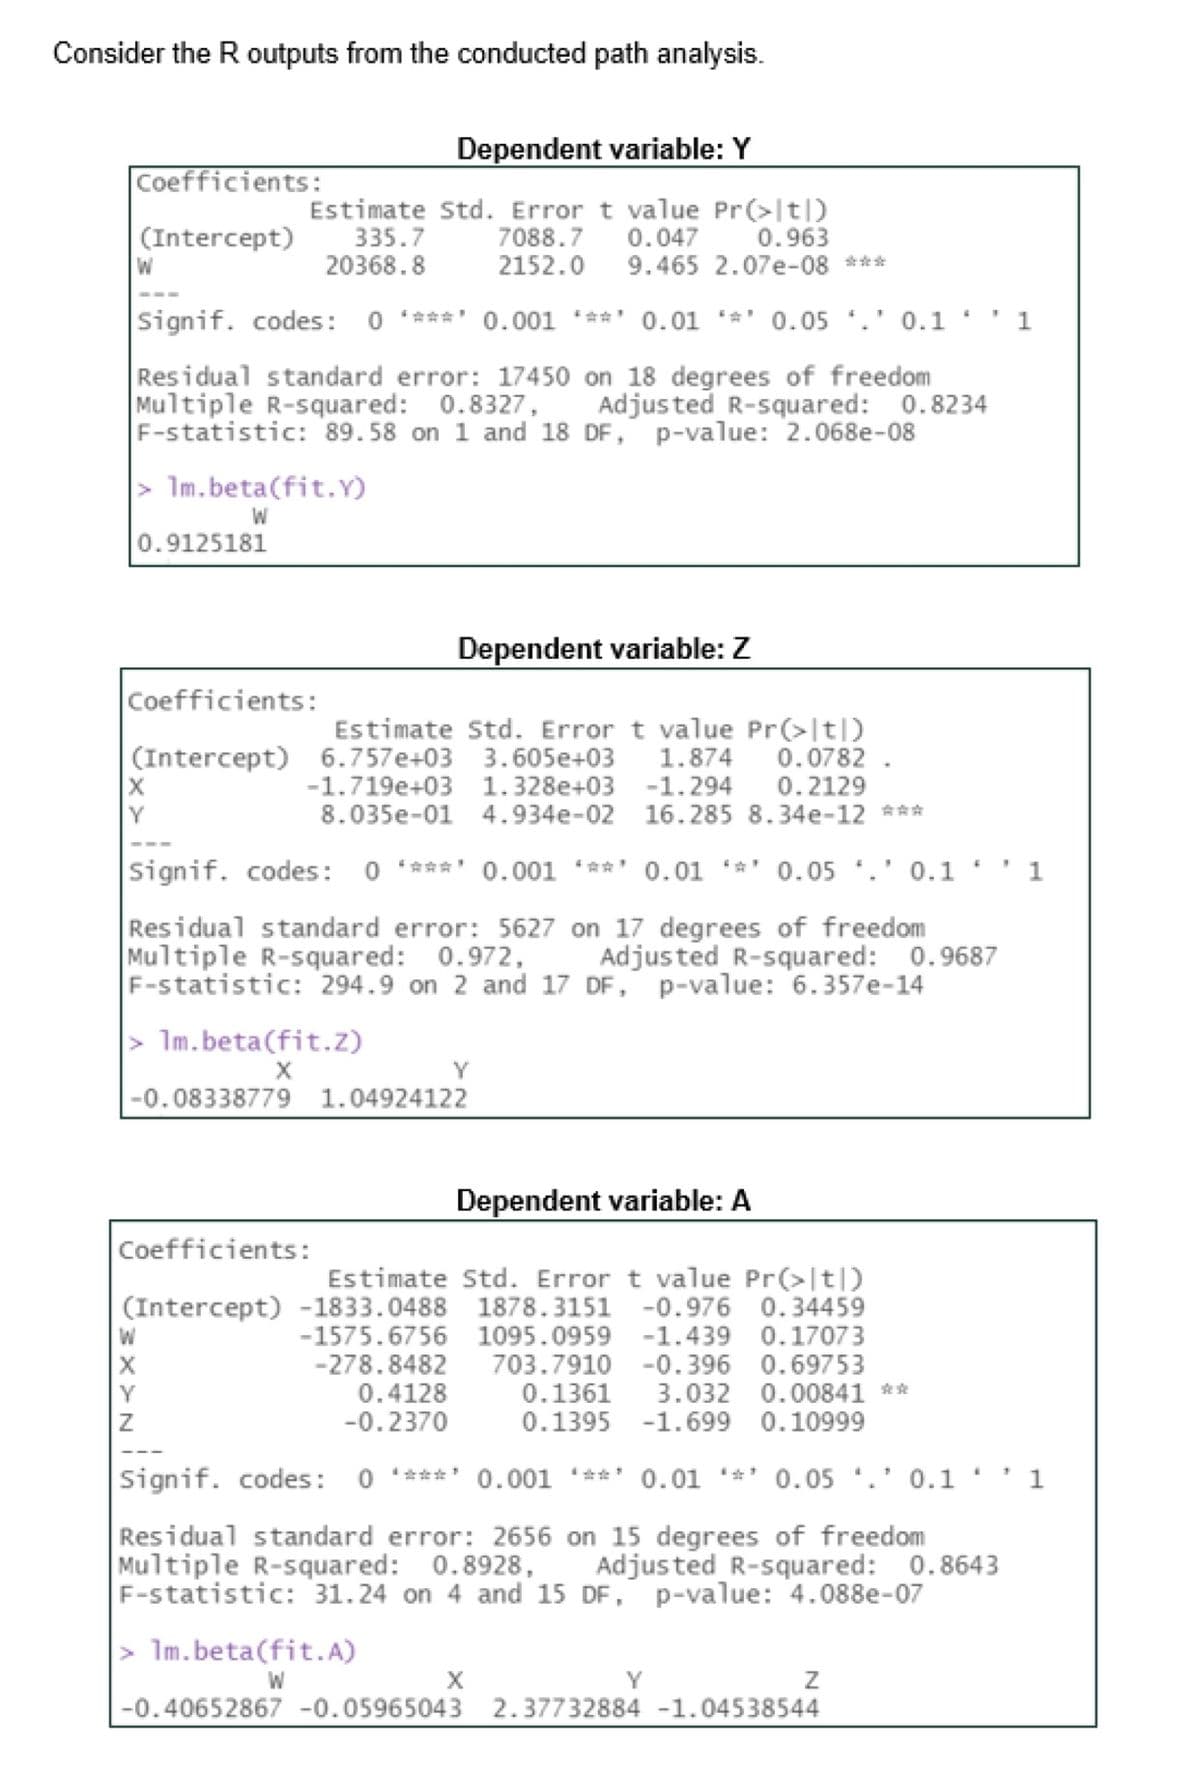 Consider the R outputs from the conducted path analysis.
Coefficients:
(Intercept)
W
Dependent variable: Y
Estimate Std. Error t value Pr(>|t|)
0.963
335.7
7088.7 0.047
20368.8
2152.0
Signif. codes: 0 **** 0.001 ***0.01 *** 0.05 *.' 0.1*
Residual standard error: 17450 on 18 degrees of freedom
Multiple R-squared: 0.8327, Adjusted R-squared: 0.8234
F-statistic: 89.58 on 1 and 18 DF, p-value: 2.068e-08
> 1m.beta(fit.Y)
W
0.9125181
Coefficients:
(Intercept)
X
Y
Z
> 1m.beta(fit.z)
X
Estimate Std. Error t value Pr(>|t|)
6.757e+03 3.605e+03
1.874
-1.719e+03 1.328e+03 -1.294
8.035e-01
Dependent variable: Z
9.465 2.07e-08 ***
Signif. codes: 0 ***** 0.001 **** 0.01 *** 0.05.' 0.11
Residual standard error: 5627 on 17 degrees of freedom
Multiple R-squared: 0.972,
Adjusted R-squared: 0.9687
F-statistic: 294.9 on 2 and 17 DF, p-value: 6.357e-14
-0.08338779 1.04924122
Y
> 1m.beta(fit.A)
W
0.0782.
0.2129
4.934e-02 16.285 8.34e-12 ***
Coefficients:
Estimate Std. Error t value Pr(>|t|)
(Intercept) -1833.0488 1878.3151 -0.976 0.34459
-1575.6756 1095.0959 -1.439 0.17073
703.7910 -0.396 0.69753
0.1361 3.032 0.00841 **
0.1395 -1.699 0.10999
-278.8482
0.4128
-0.2370
Dependent variable: A
X
Signif. codes: 0 *****
**¹0.001 **** 0.010.05.0.1'1
Residual standard error: 2656 on 15 degrees of freedom
Multiple R-squared: 0.8928, Adjusted R-squared:
F-statistic: 31.24 on 4 and 15 DF, p-value: 4.088e-07
1
-0.40652867 -0.05965043 2.37732884 -1.04538544
2.37732884 -1.04538544
0.8643